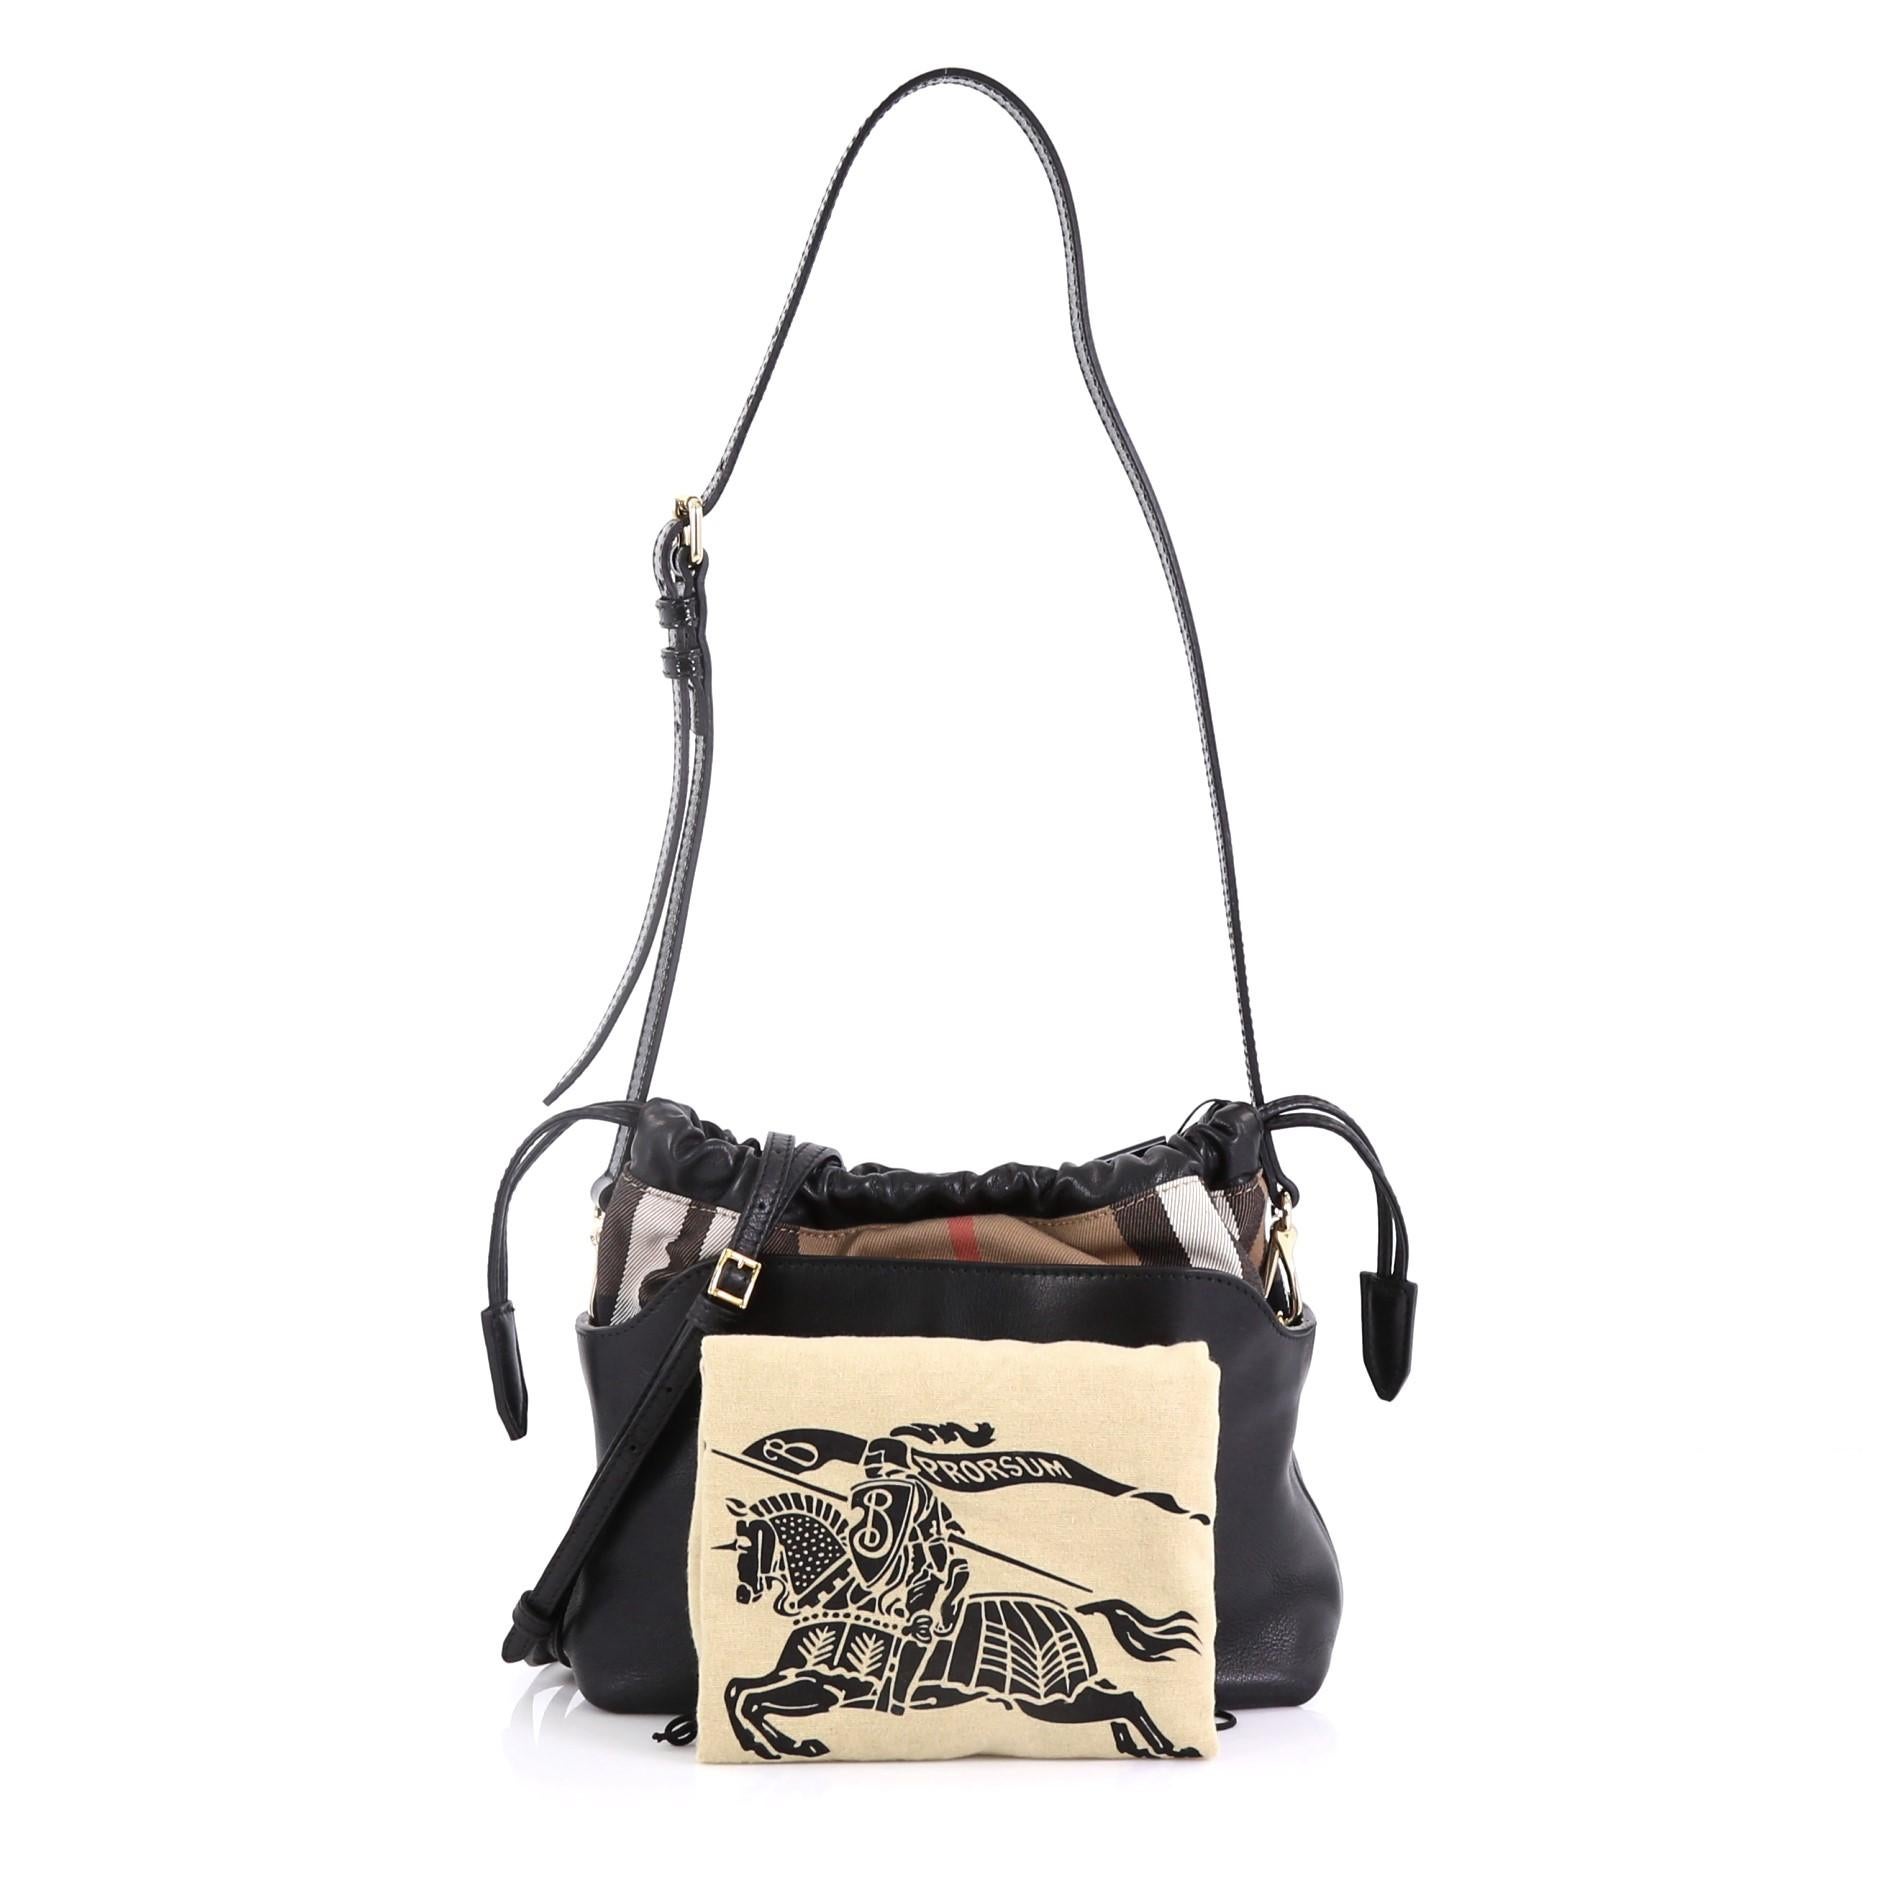 This Burberry Little Crush Crossbody Bag Leather and House Check Canvas, crafted from black leather and house check canvas, features an adjustable crossbody strap, polished Burberry logo plaque, and gold-tone hardware. Its drawstring and magnetic